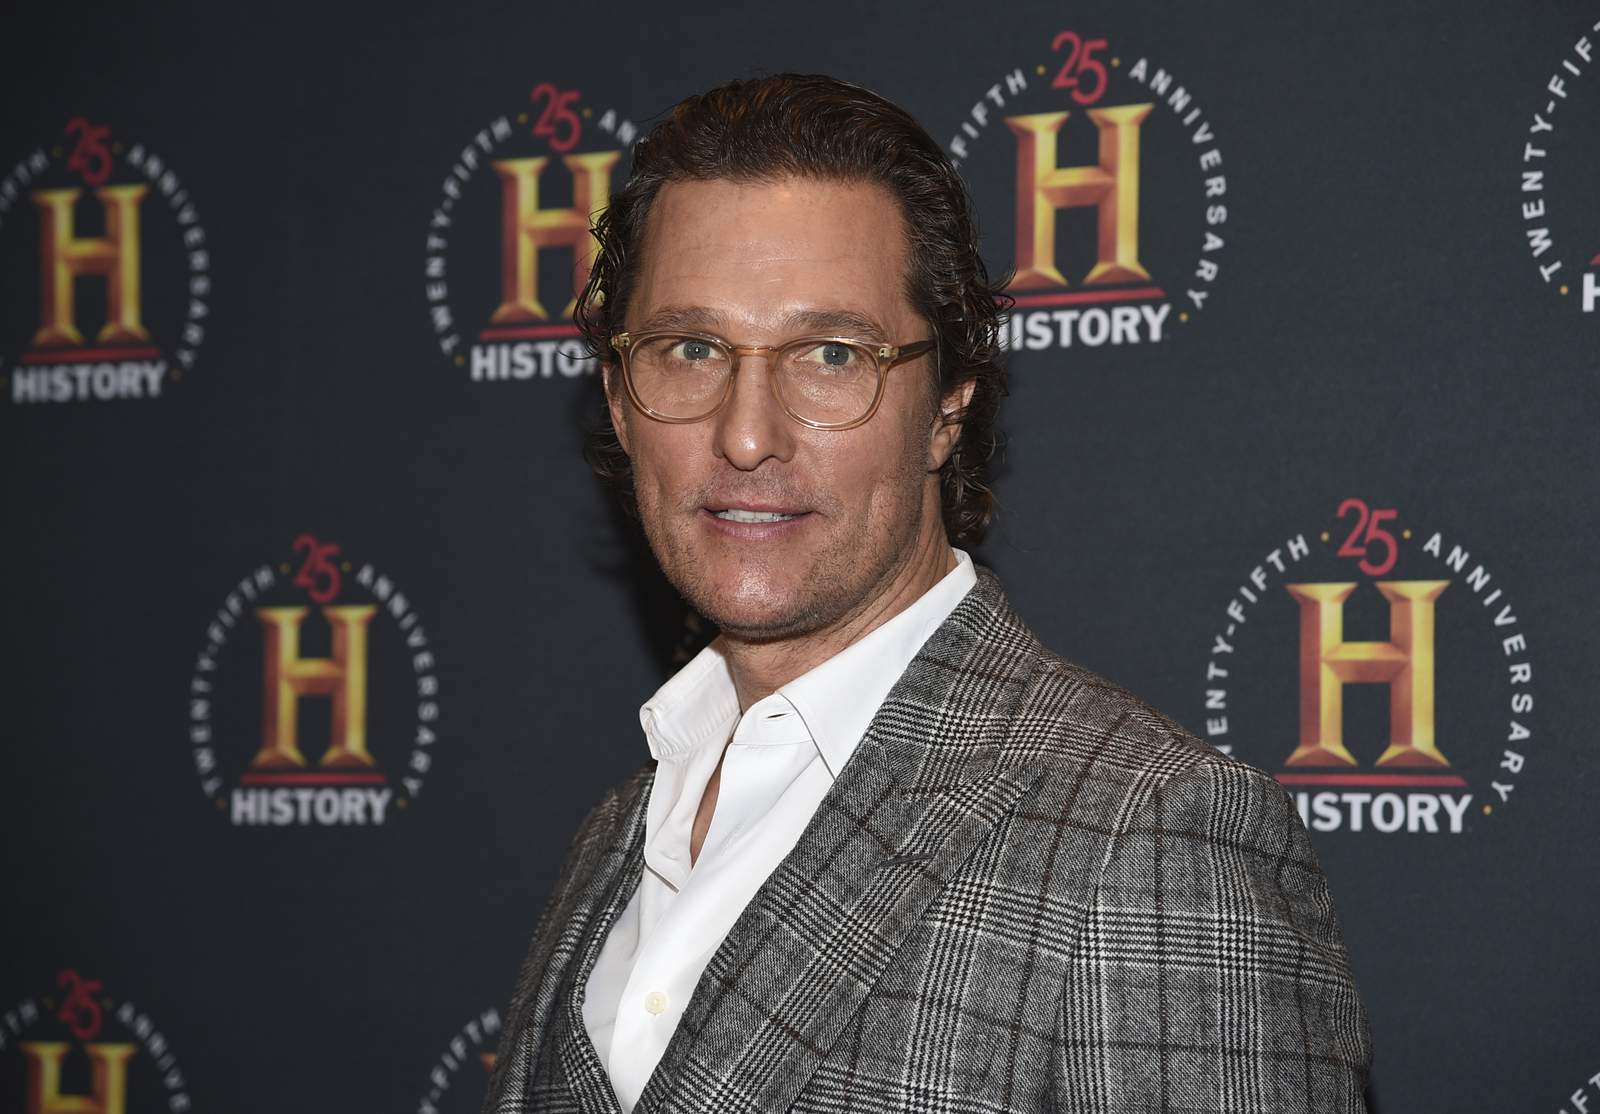 McConaughey writing book based on life-changing adventures